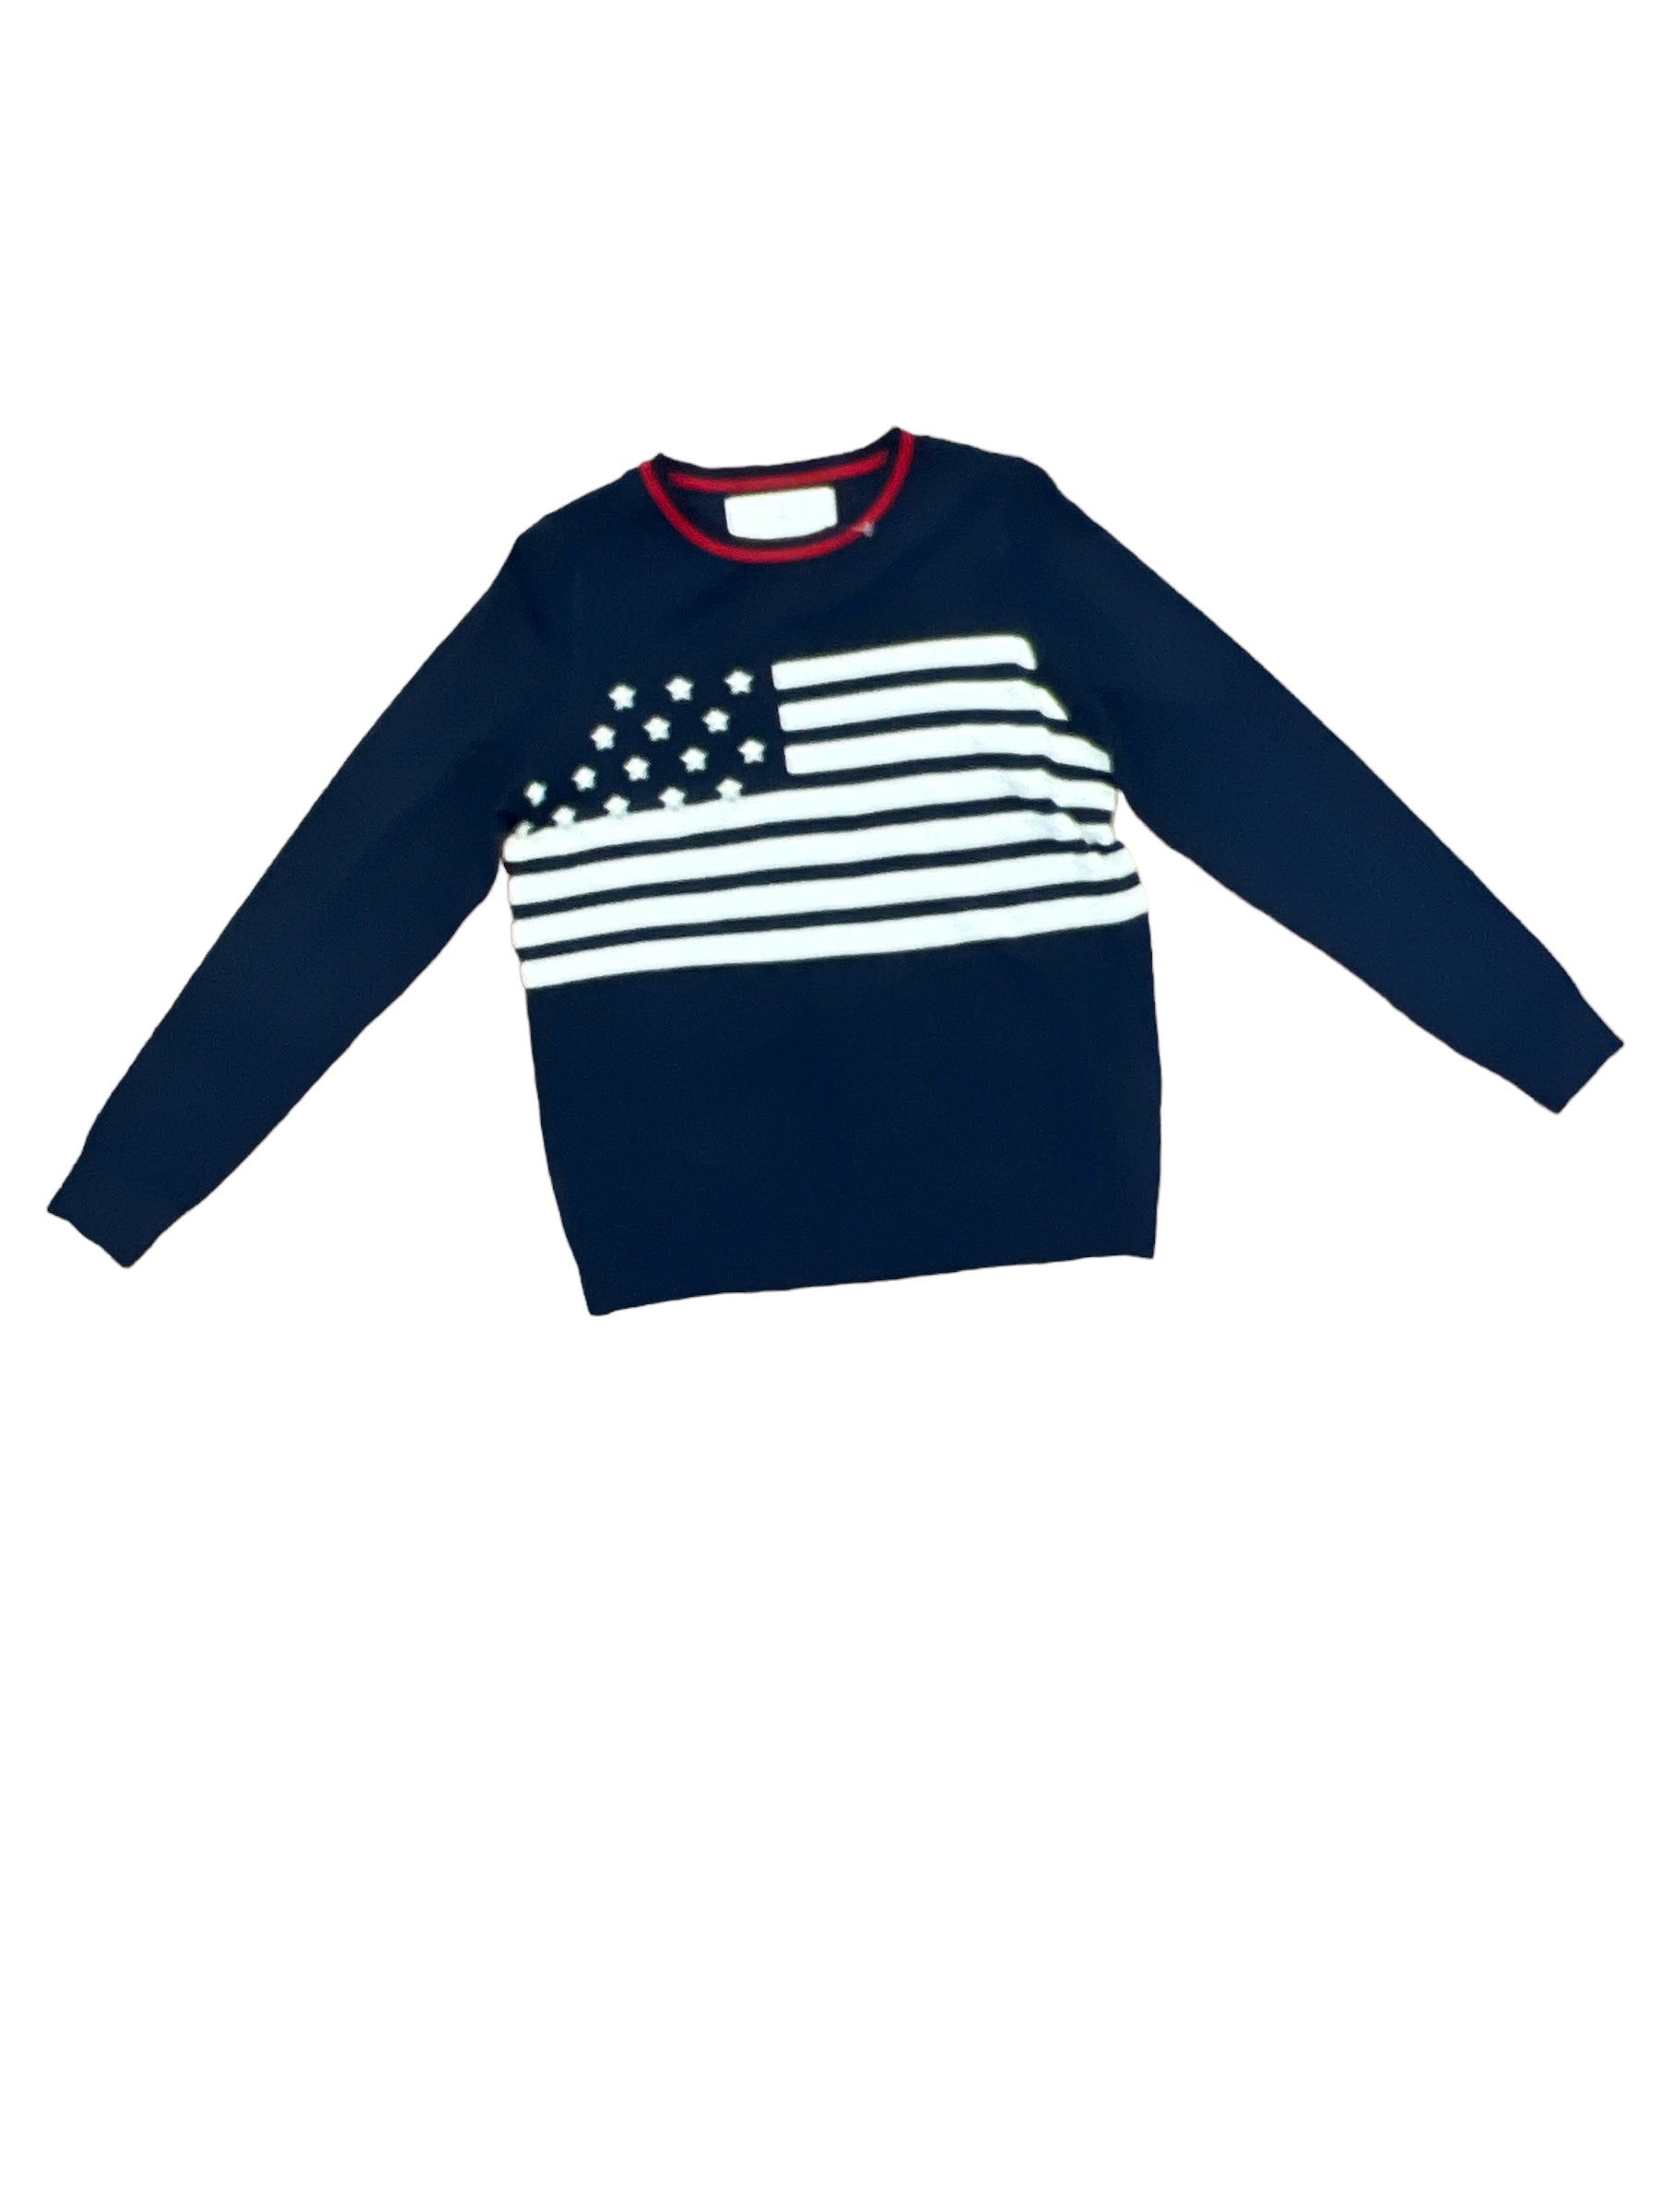 All American Sweater-120 Casual Tops & Tees-karlie-Simply Stylish Boutique | Women’s & Kid’s Fashion | Paducah, KY